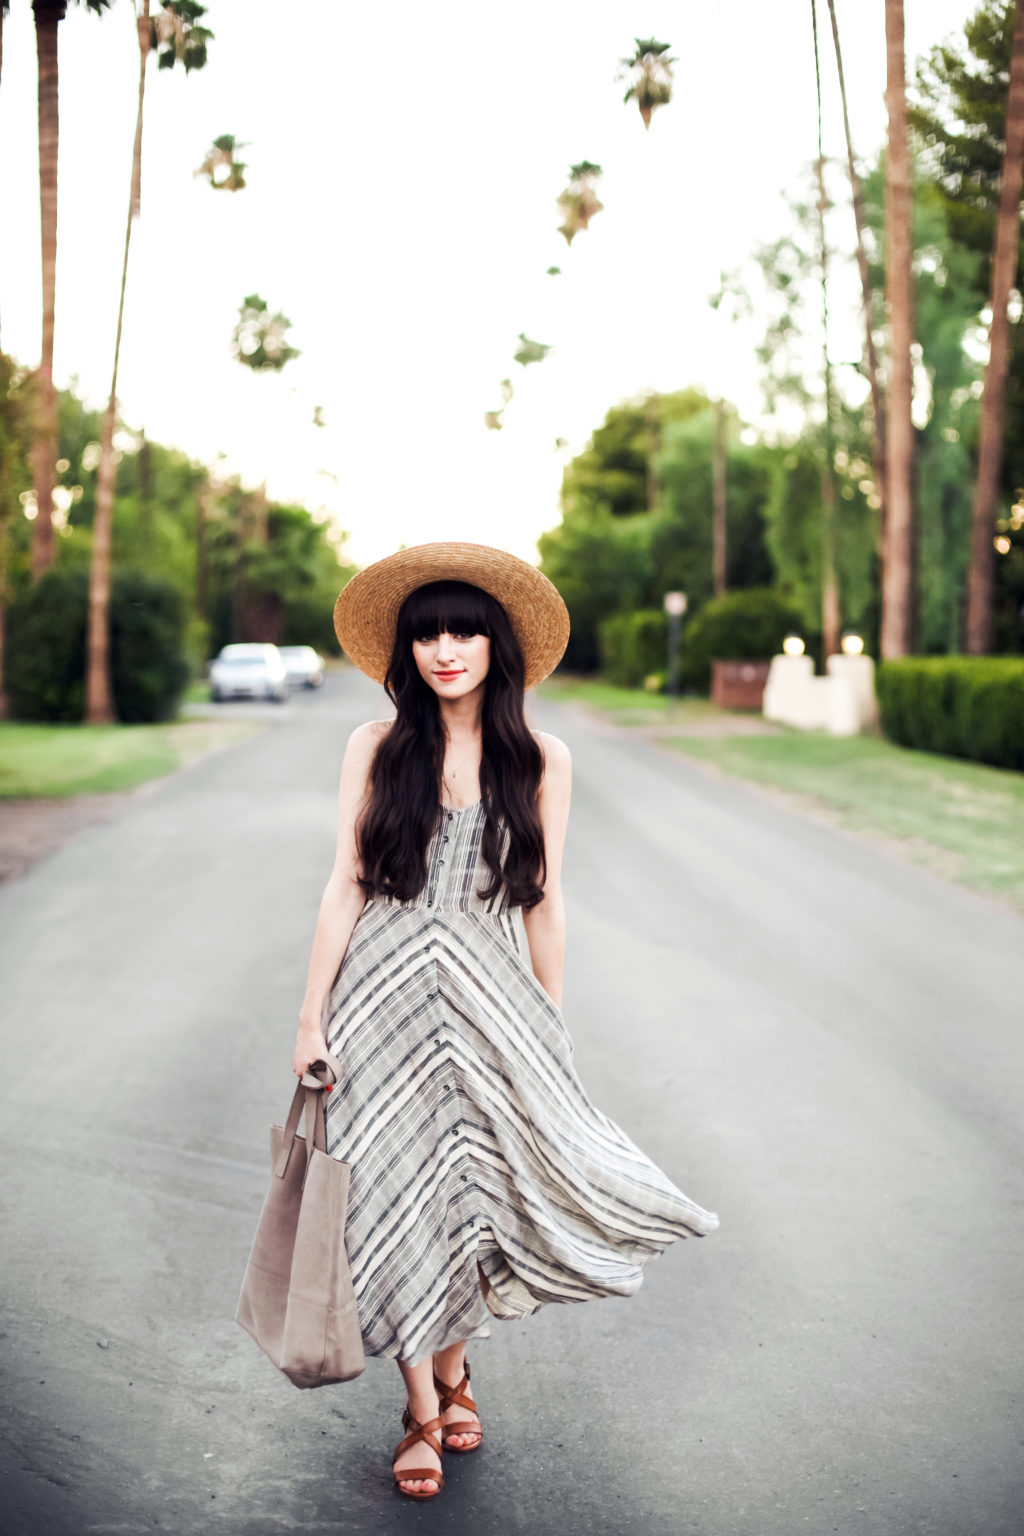 New Darlings - Summer Style - Maxi and Straw Hat